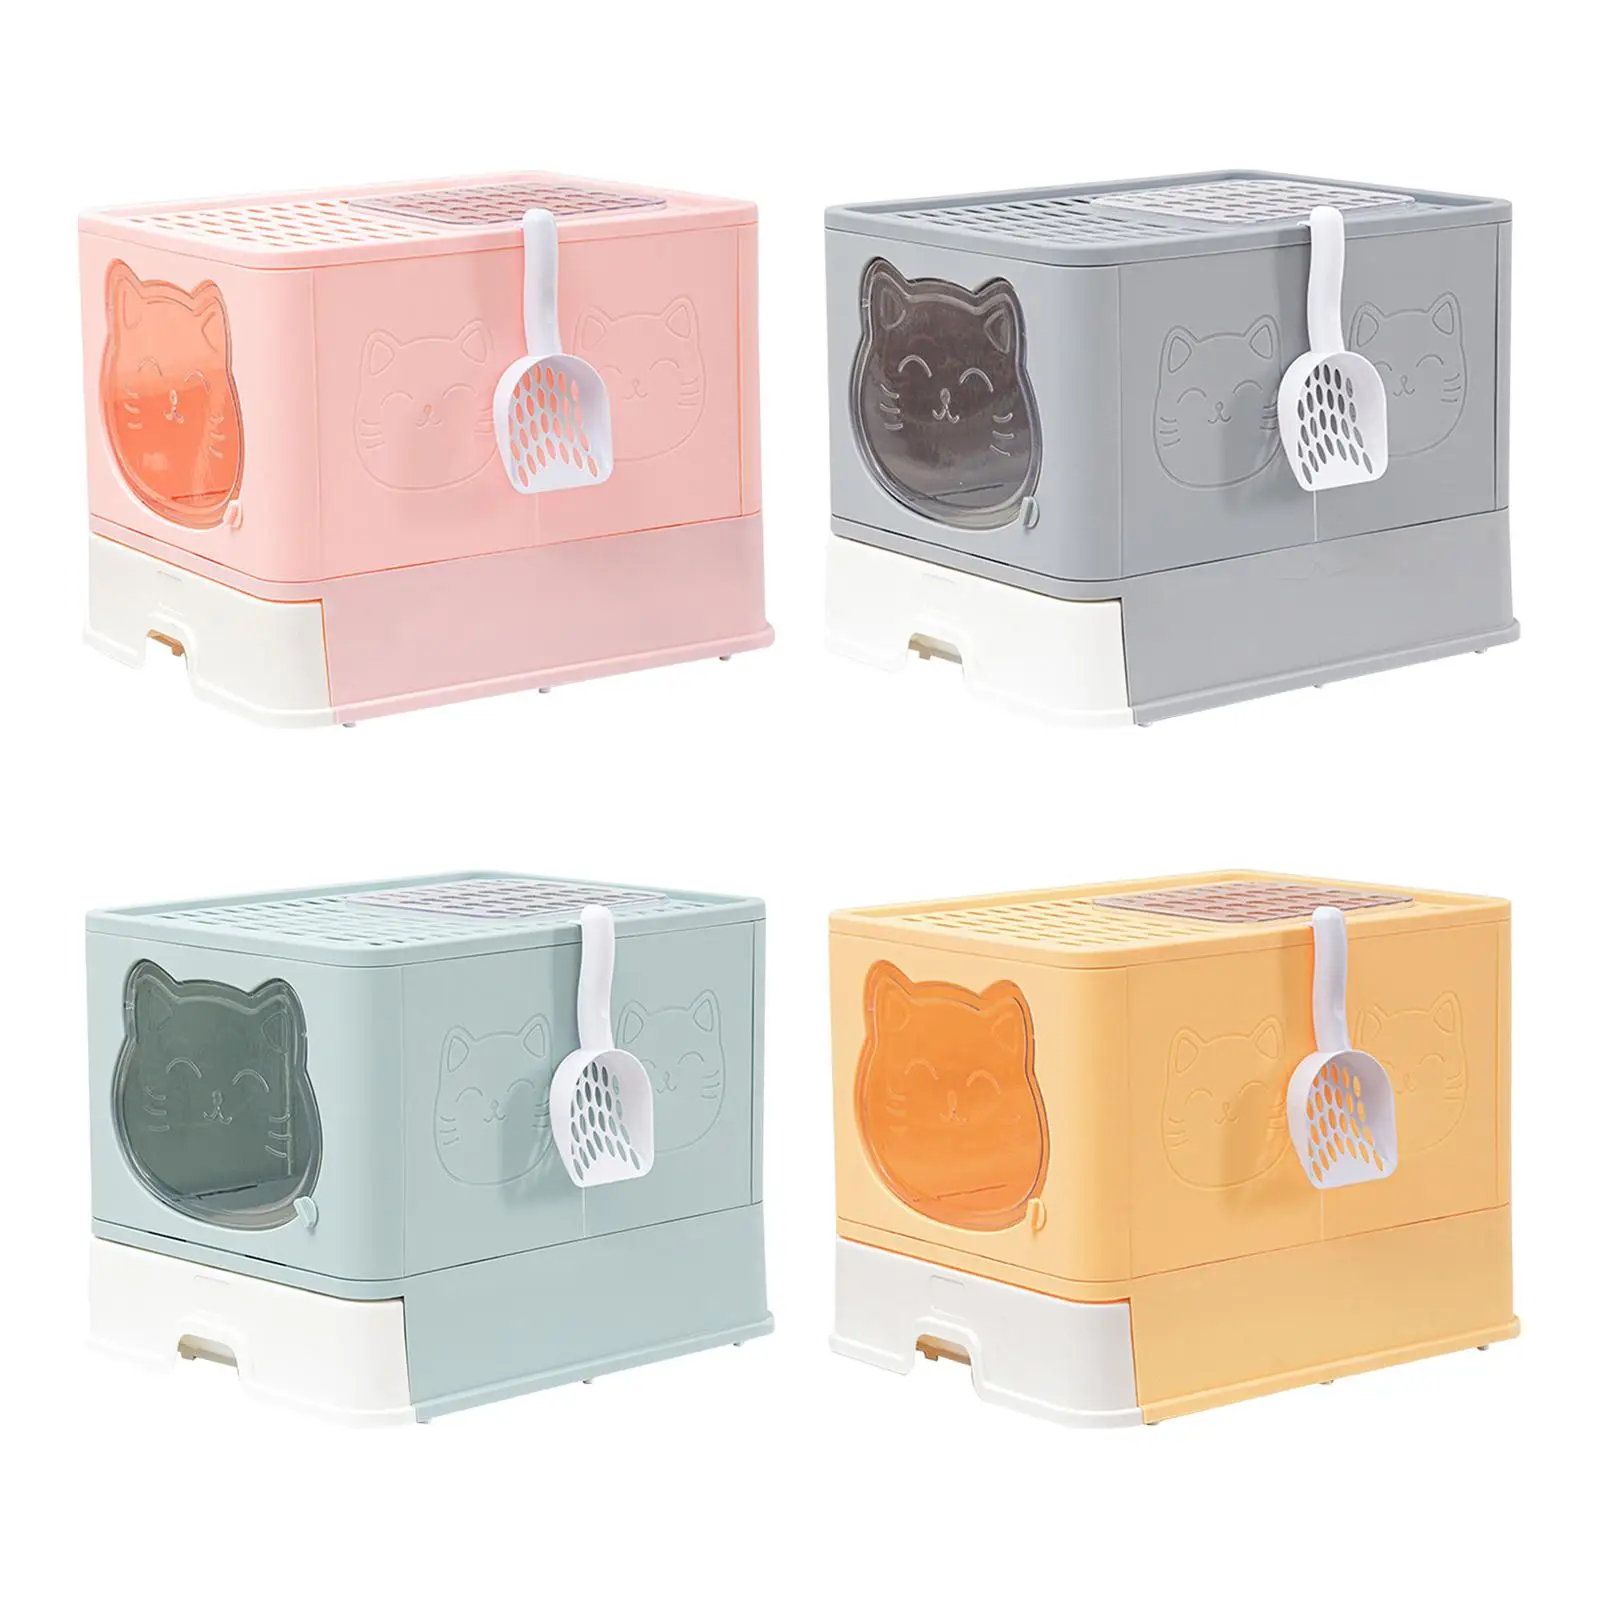 Large Cat Litter Box Collapsible Drawer Type with Lid Front and Top Entry